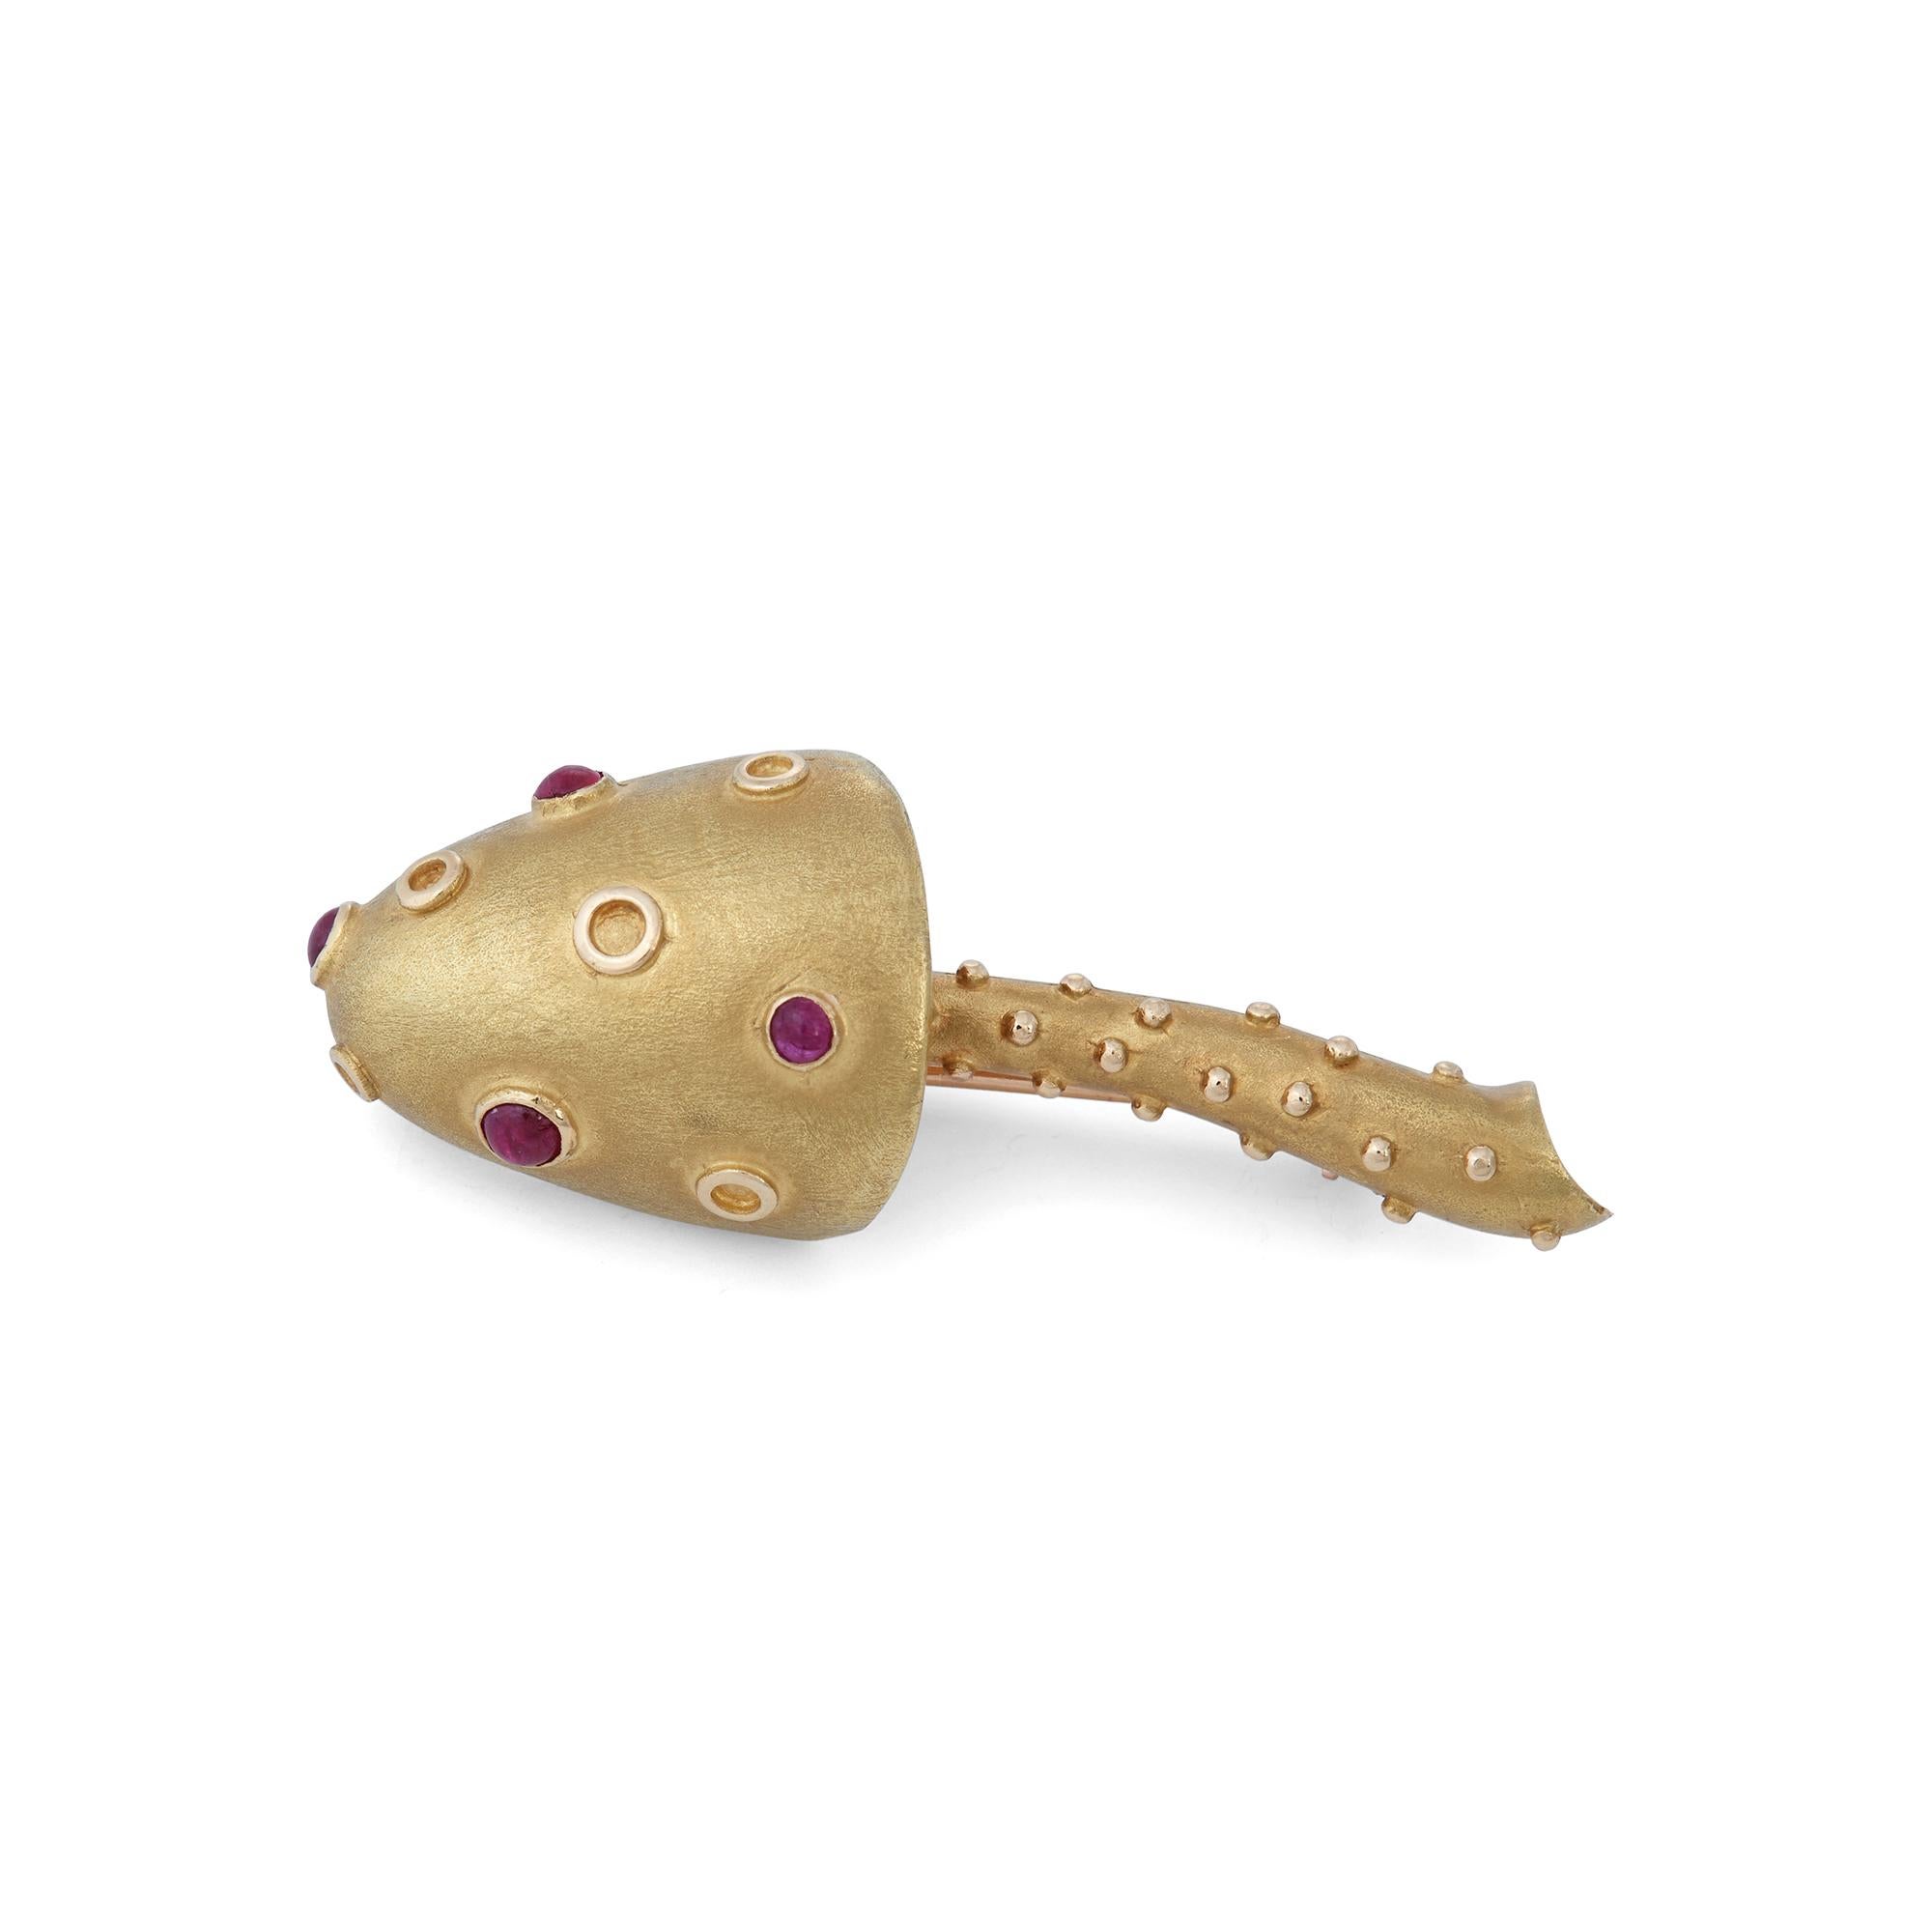 Authentic Tiffany & Co pin crafted in 18 karat matte textured yellow gold. The whimsical mushroom design is set with four cabochon rubies on the mushroom cap. The brooch measures 2 inches in length and .71 inches at the widest point.  Signed Tiffany